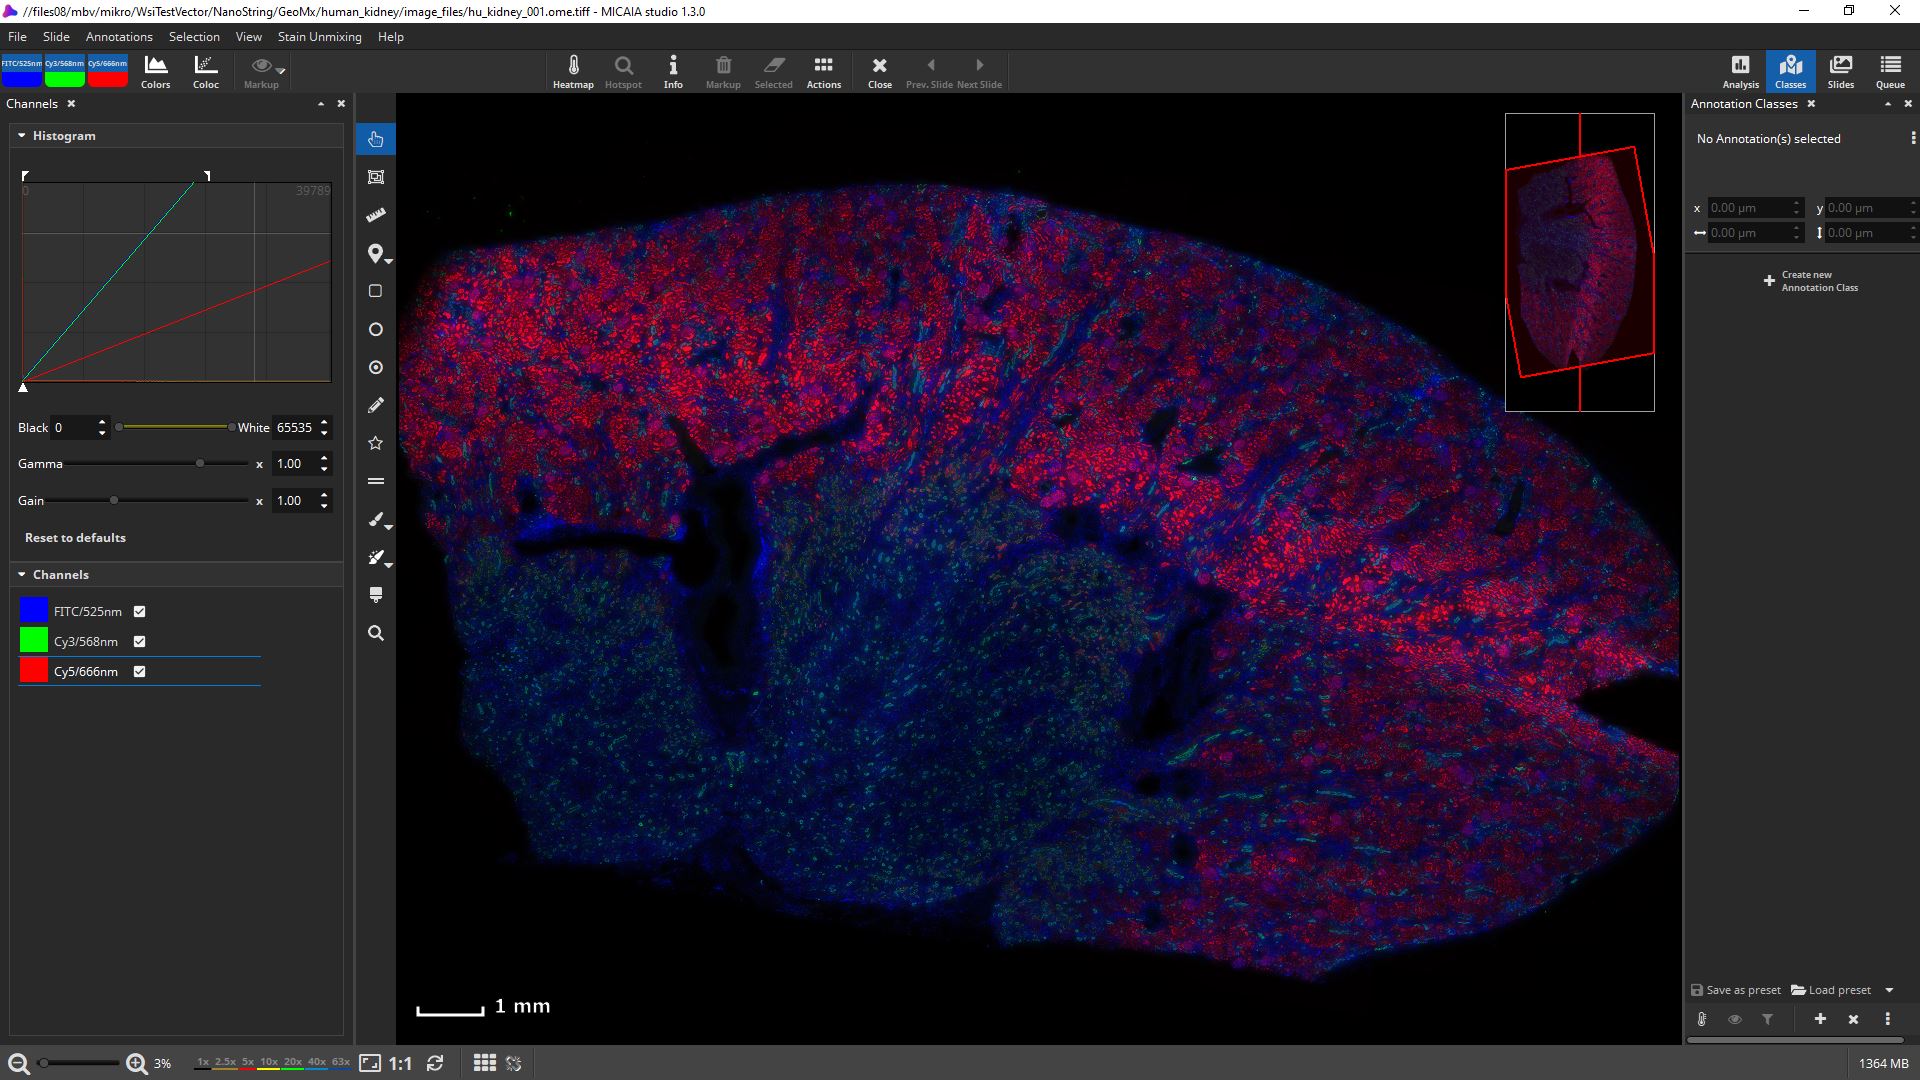 "Human Kidney" scanned with NanoString GeoMx DSP (slide copyright @ NanoString) 